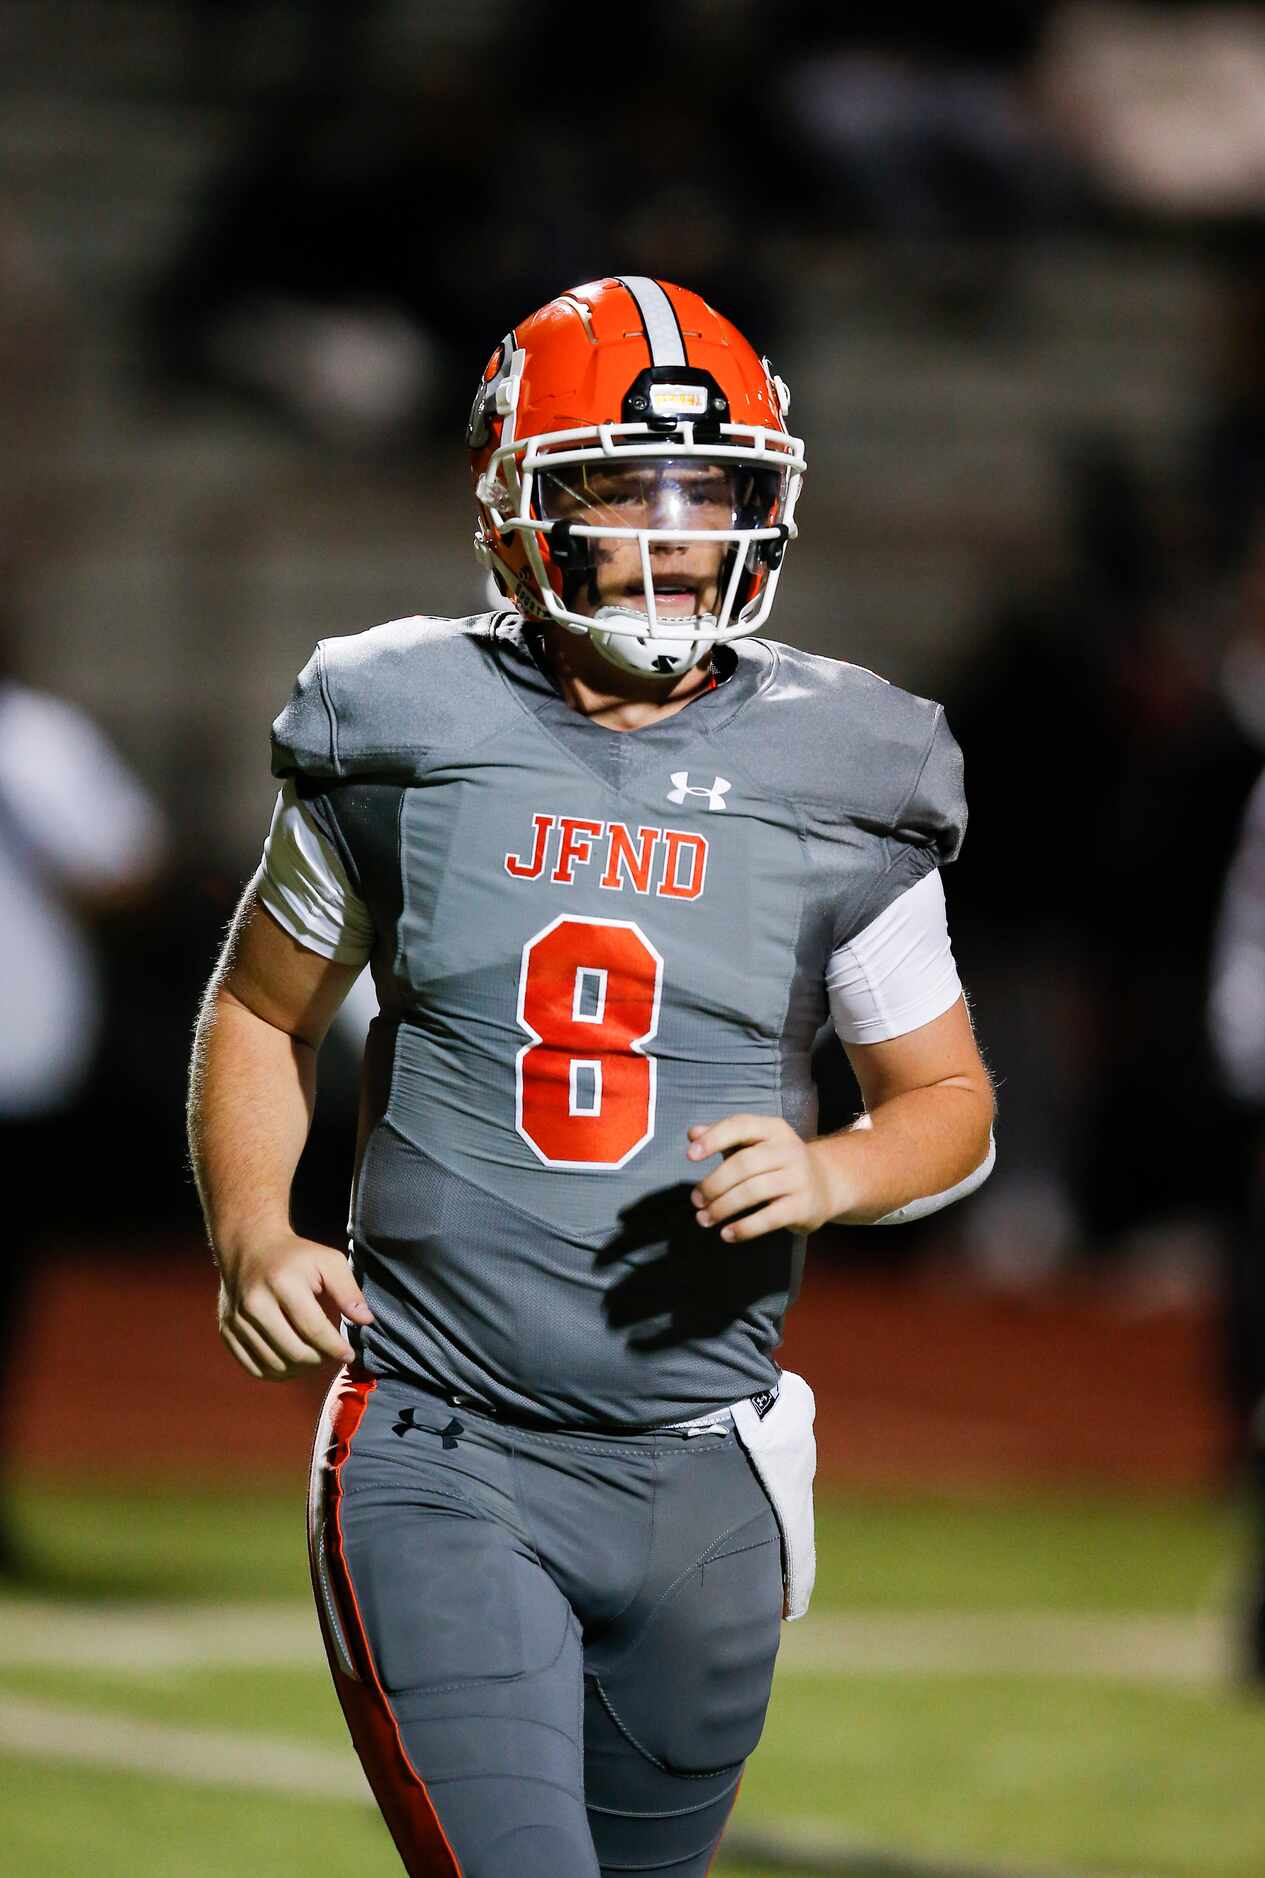 Rockwall senior quarterback Braedyn Locke jogs off the field after throwing a pass for a...